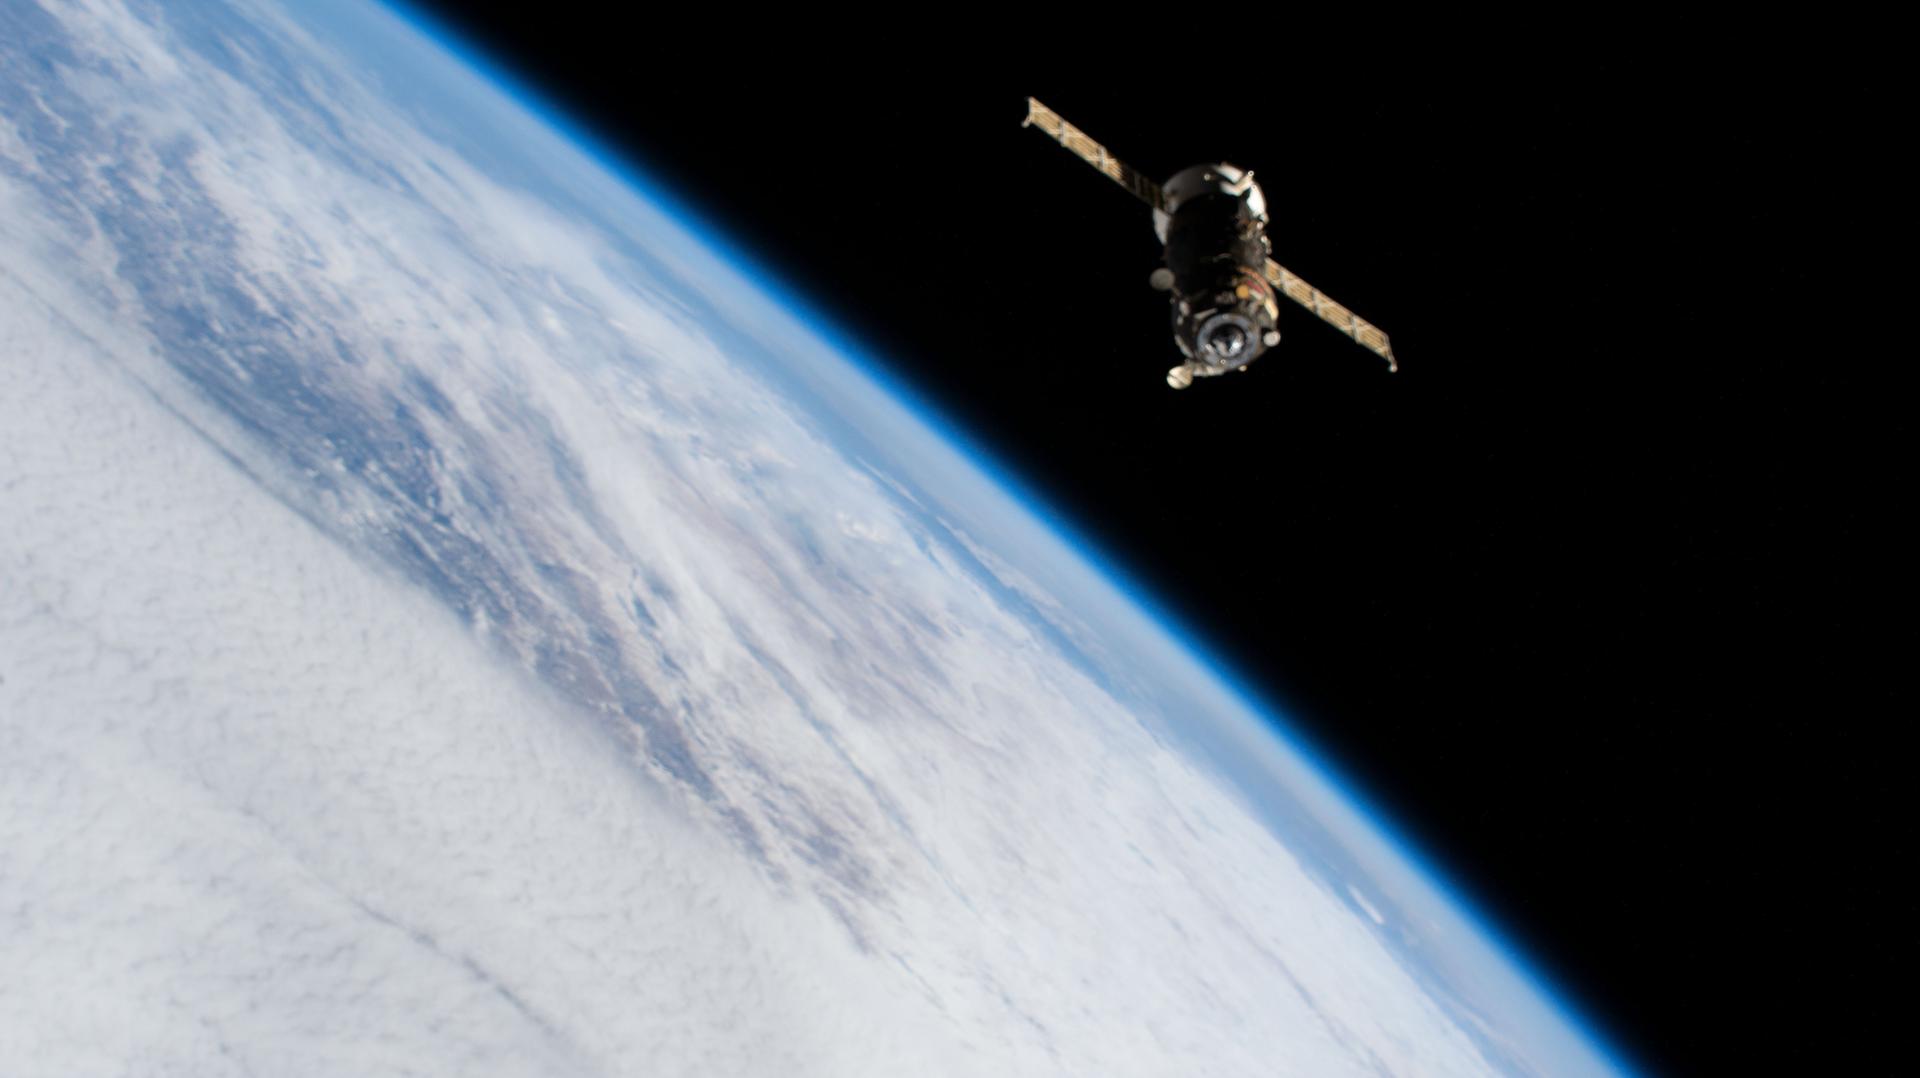 The ISS Progress 76 resupply ship departs the International Space Station